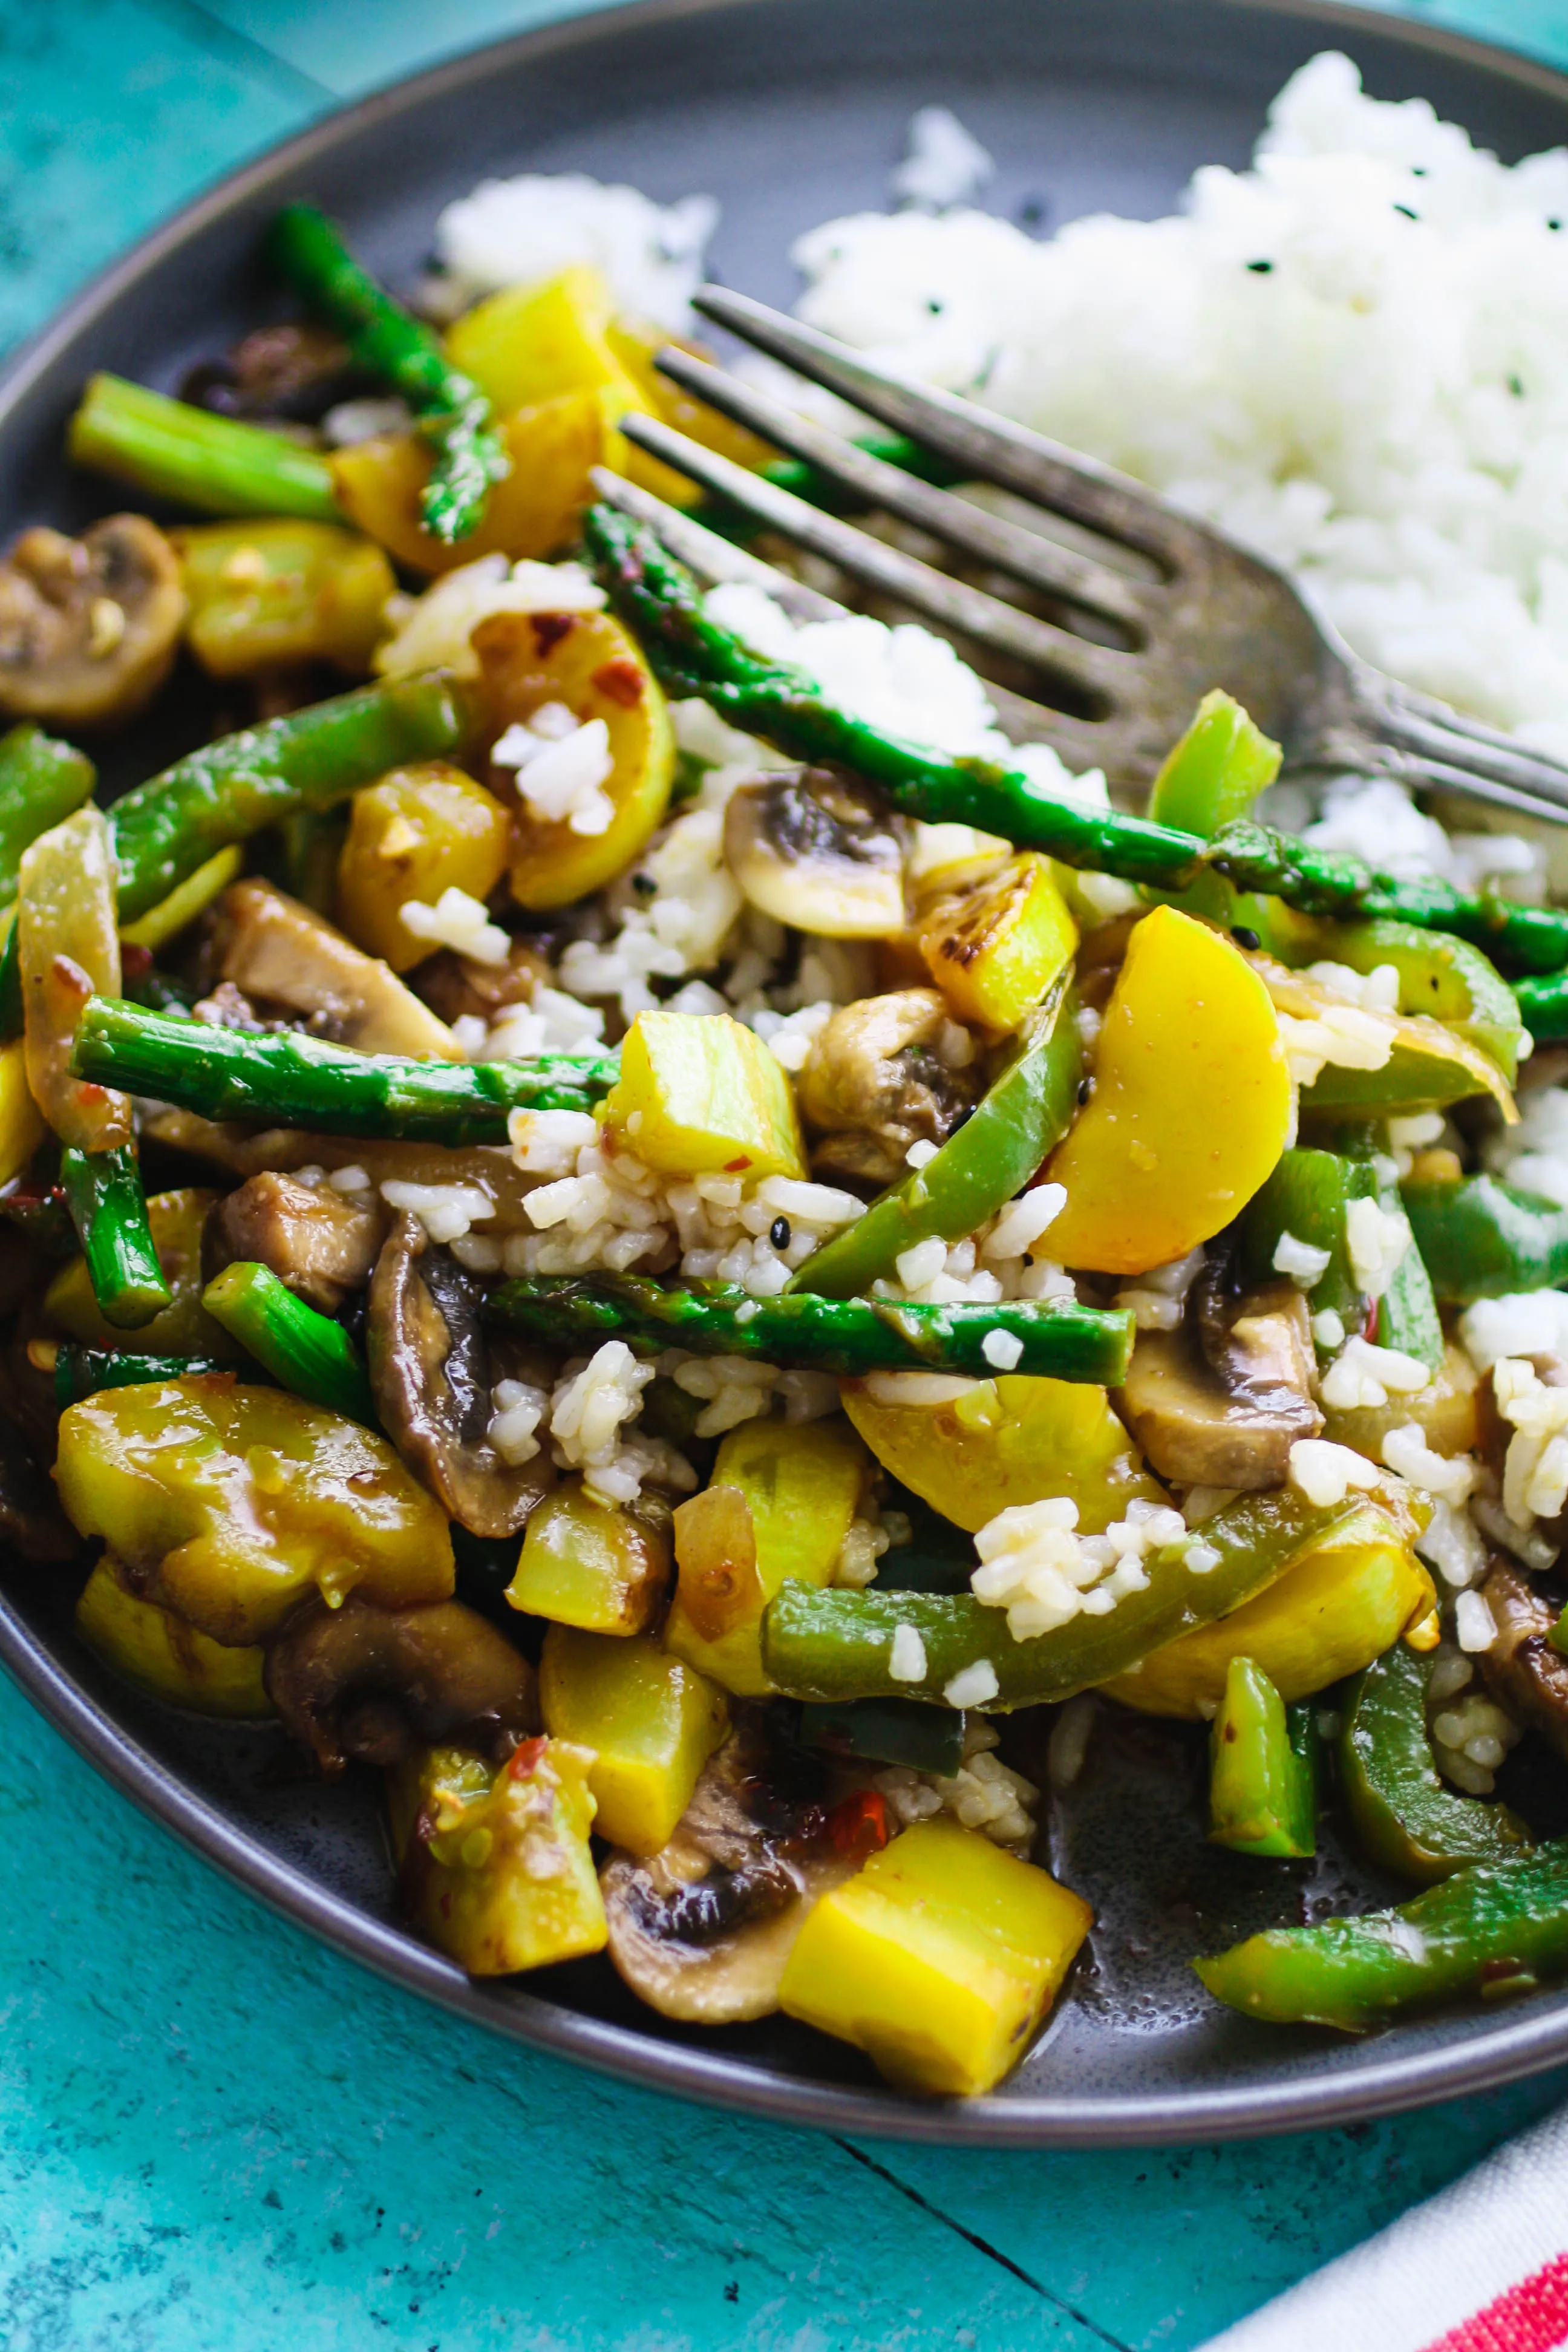 Simple Sweet & Spicy Vegetable Stir Fry is a delightful dish that is filling and flavorful. Simple Sweet & Spicy Vegetable Stir Fry is a tasty meatless meal for any night of the week.